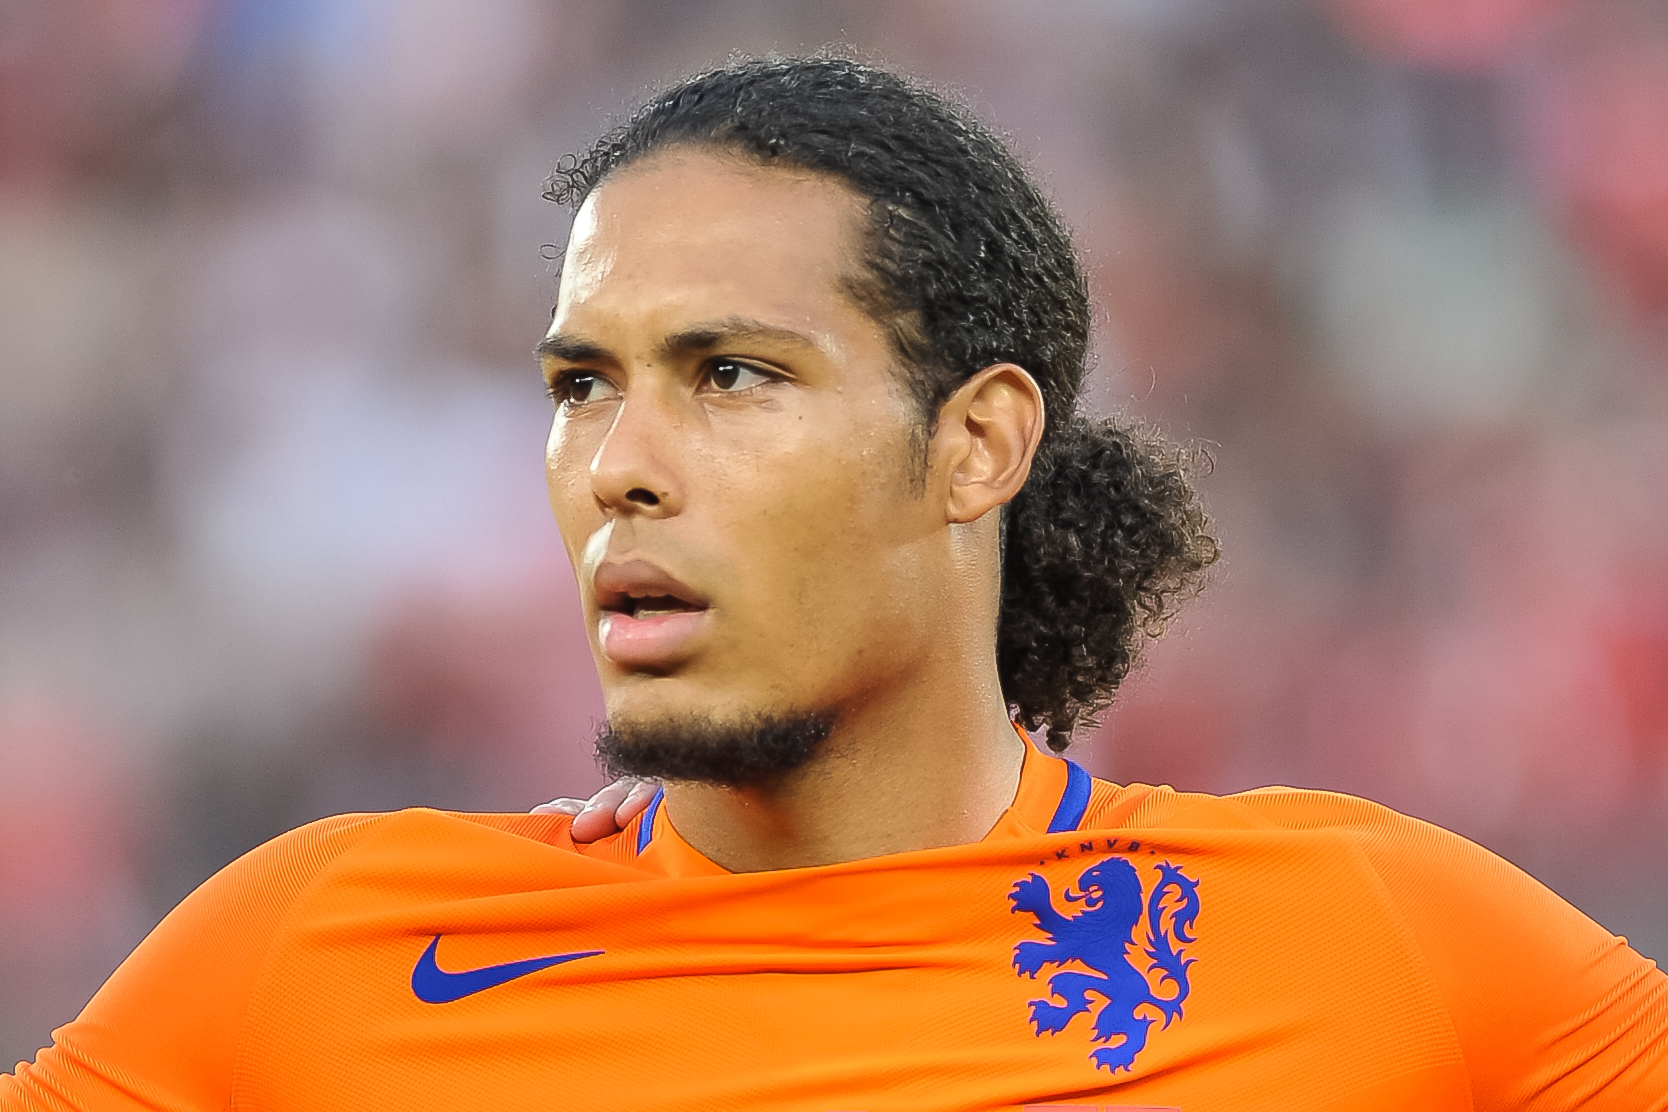  Sergio Ramos Or Van Dijk? Who is the better player?